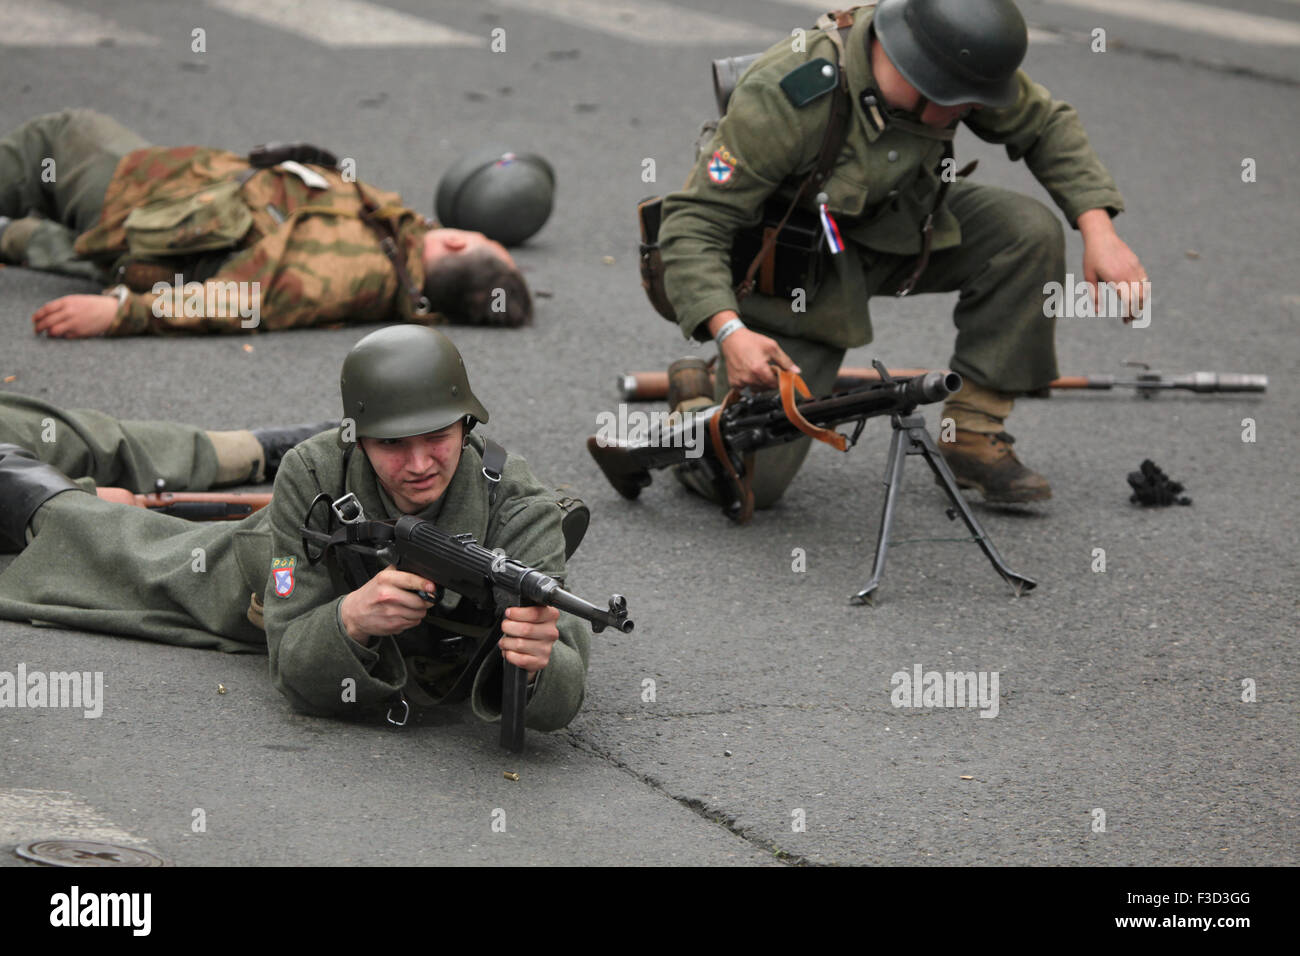 Reenactors uniformed as soldiers of the Russian Liberation Army (ROA) attend the reenactment of the 1945 Prague uprising in Prague, Czech Republic, on May 9, 2015. The Russian Liberation Army also known as the Vlasov Army came to the help of the Czech insurgents to support the Prague uprising against the German occupation which started on May 5, 1945. Stock Photo